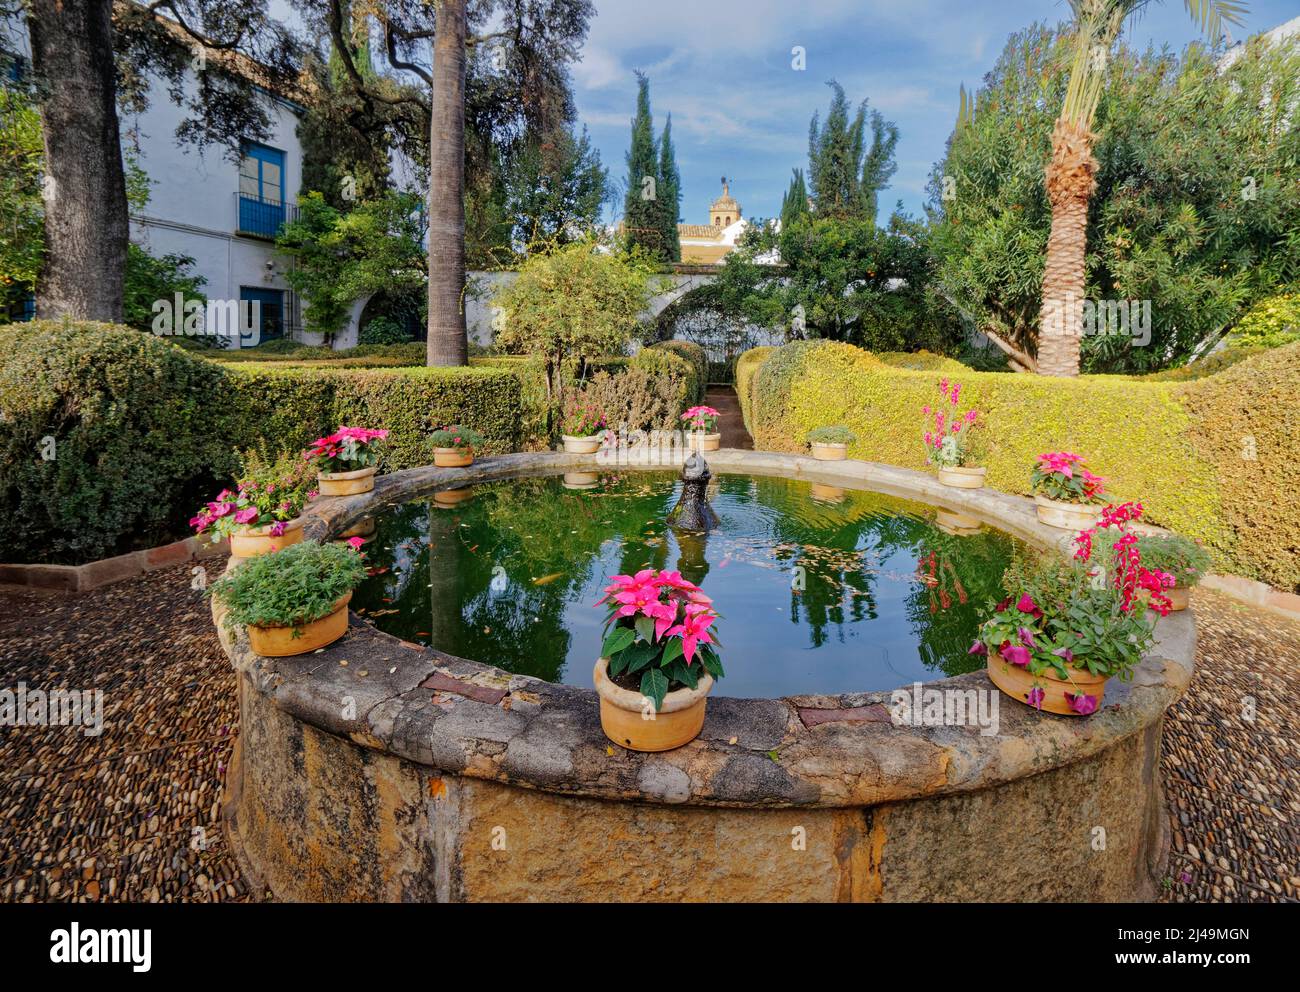 VIANA PALACE GARDENS CORDOBA SPAIN EXTERIOR THE GARDEN WITH TREES AND A POOL WITH FOUNTAIN AND RING OF FLOWERS Stock Photo